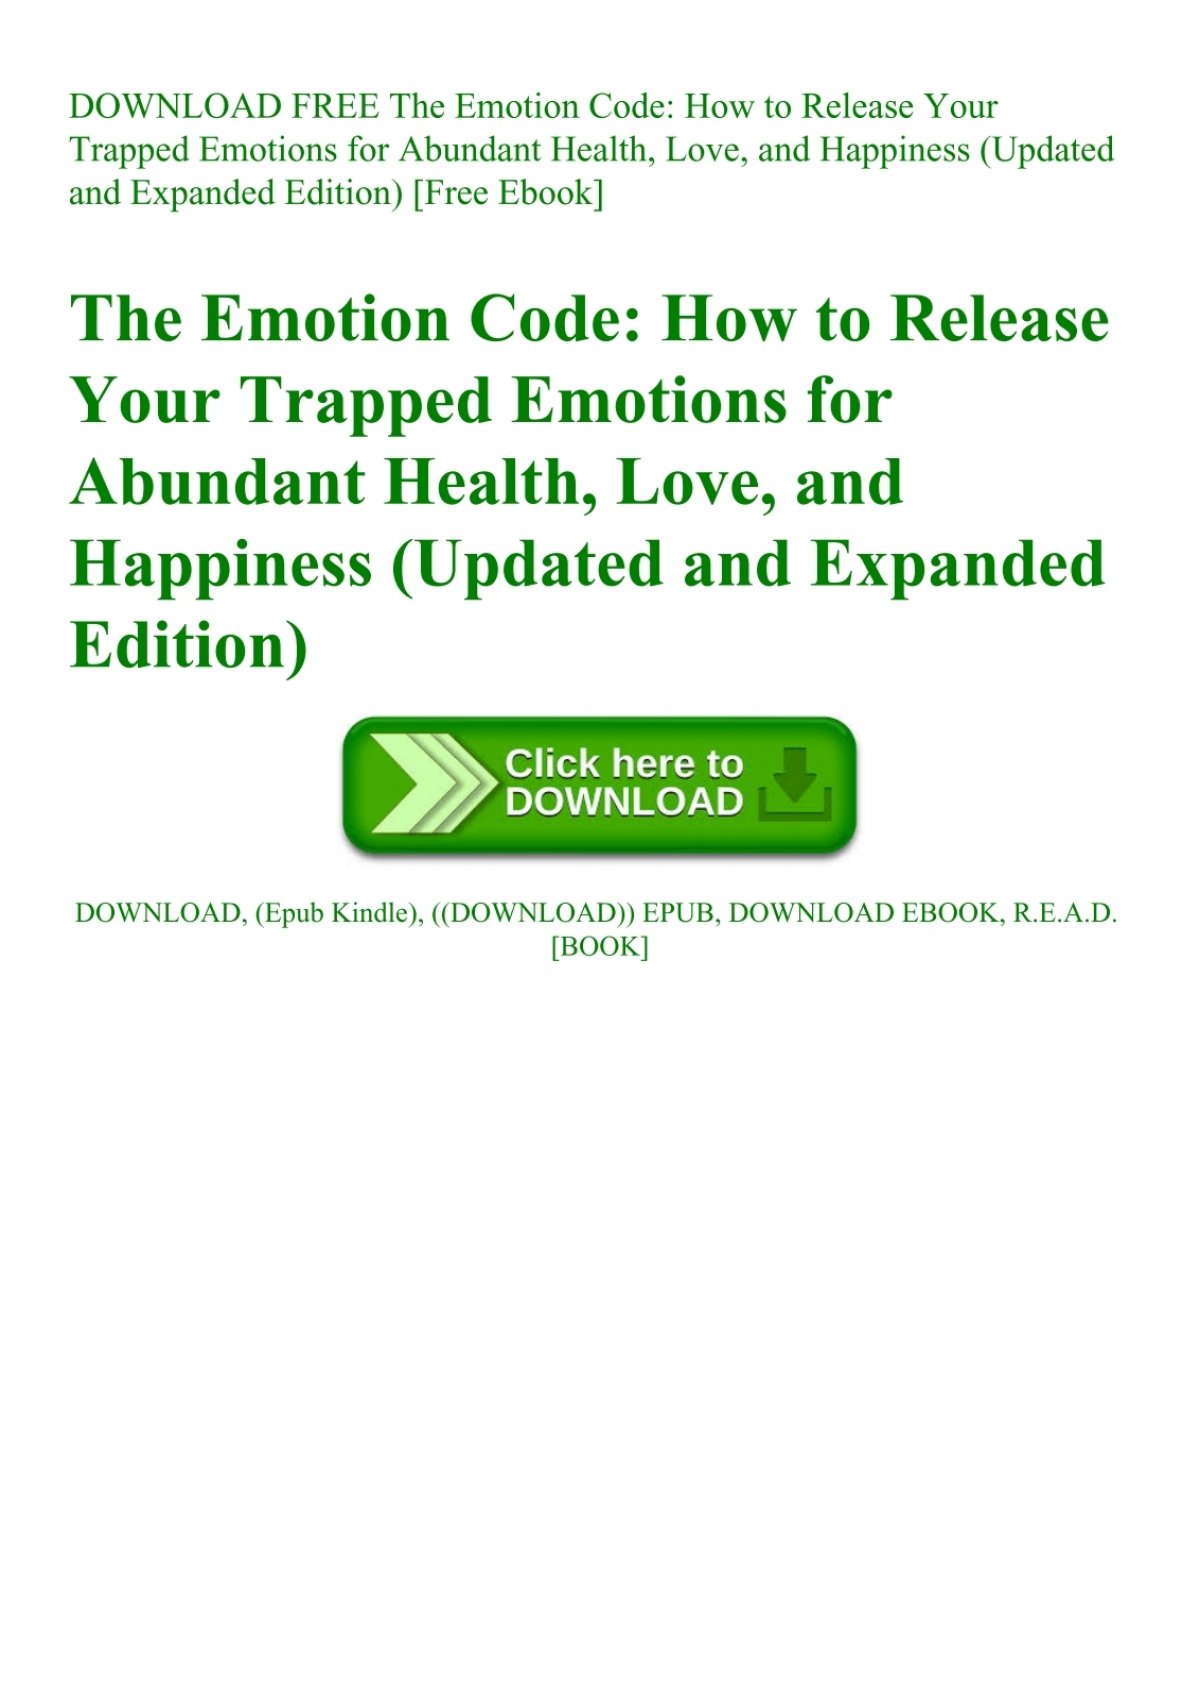 download-free-the-emotion-code-how-to-release-your-trapped-emotions-for